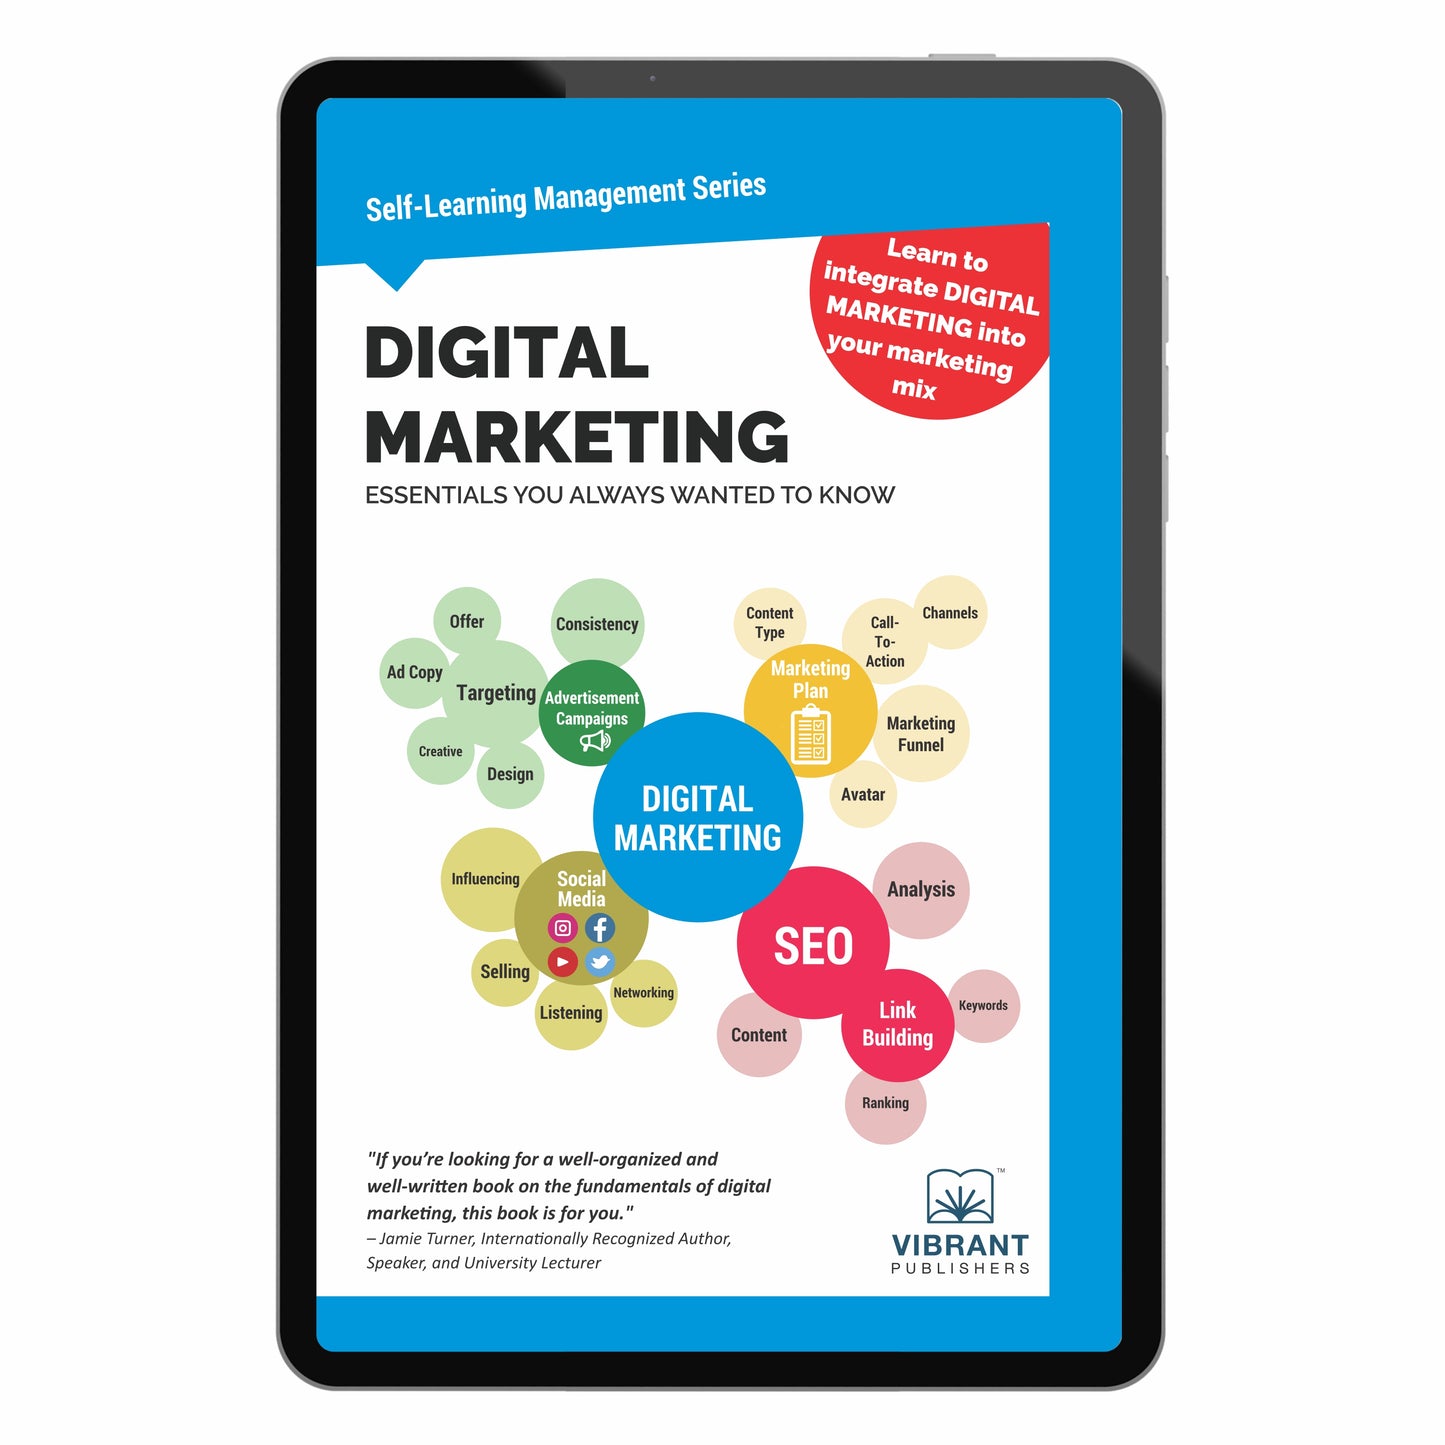 Digital Marketing Essentials You Always Wanted to Know